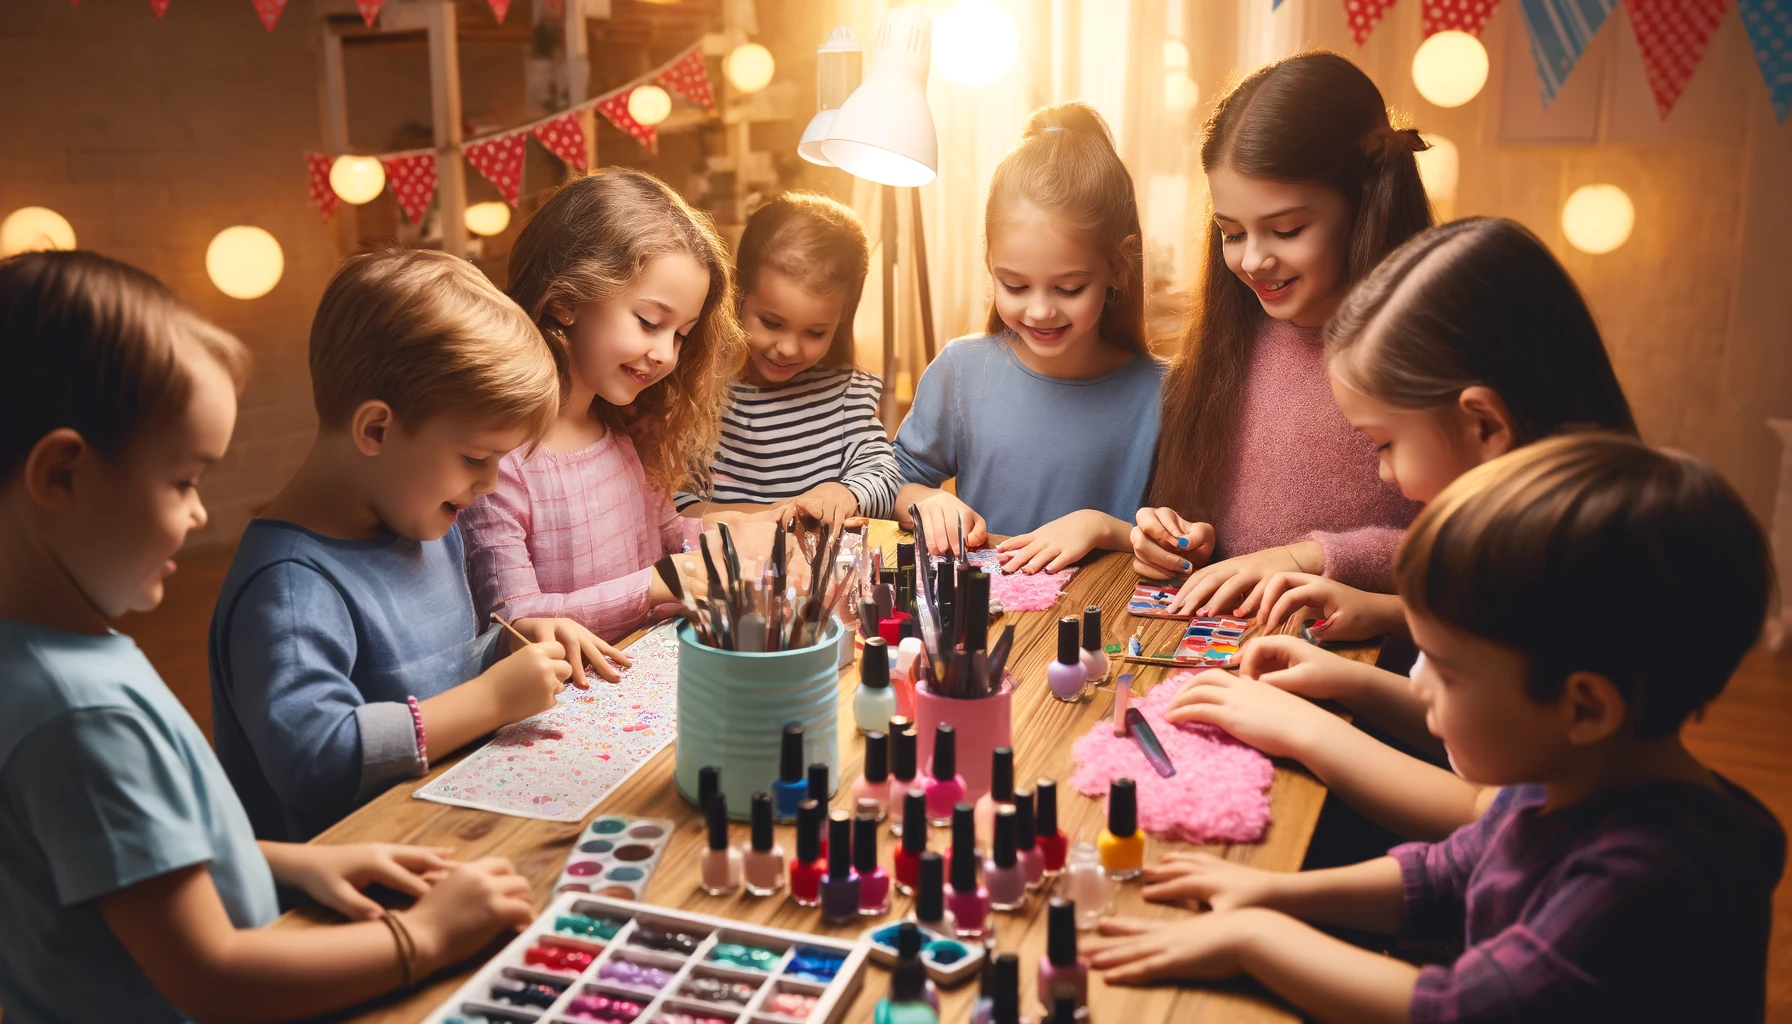 Creative Nail Art Session for Children Nail Art for Kids: 10 Safe and Fun Designs for Little Hands - 8 Pouted Lifestyle Magazine